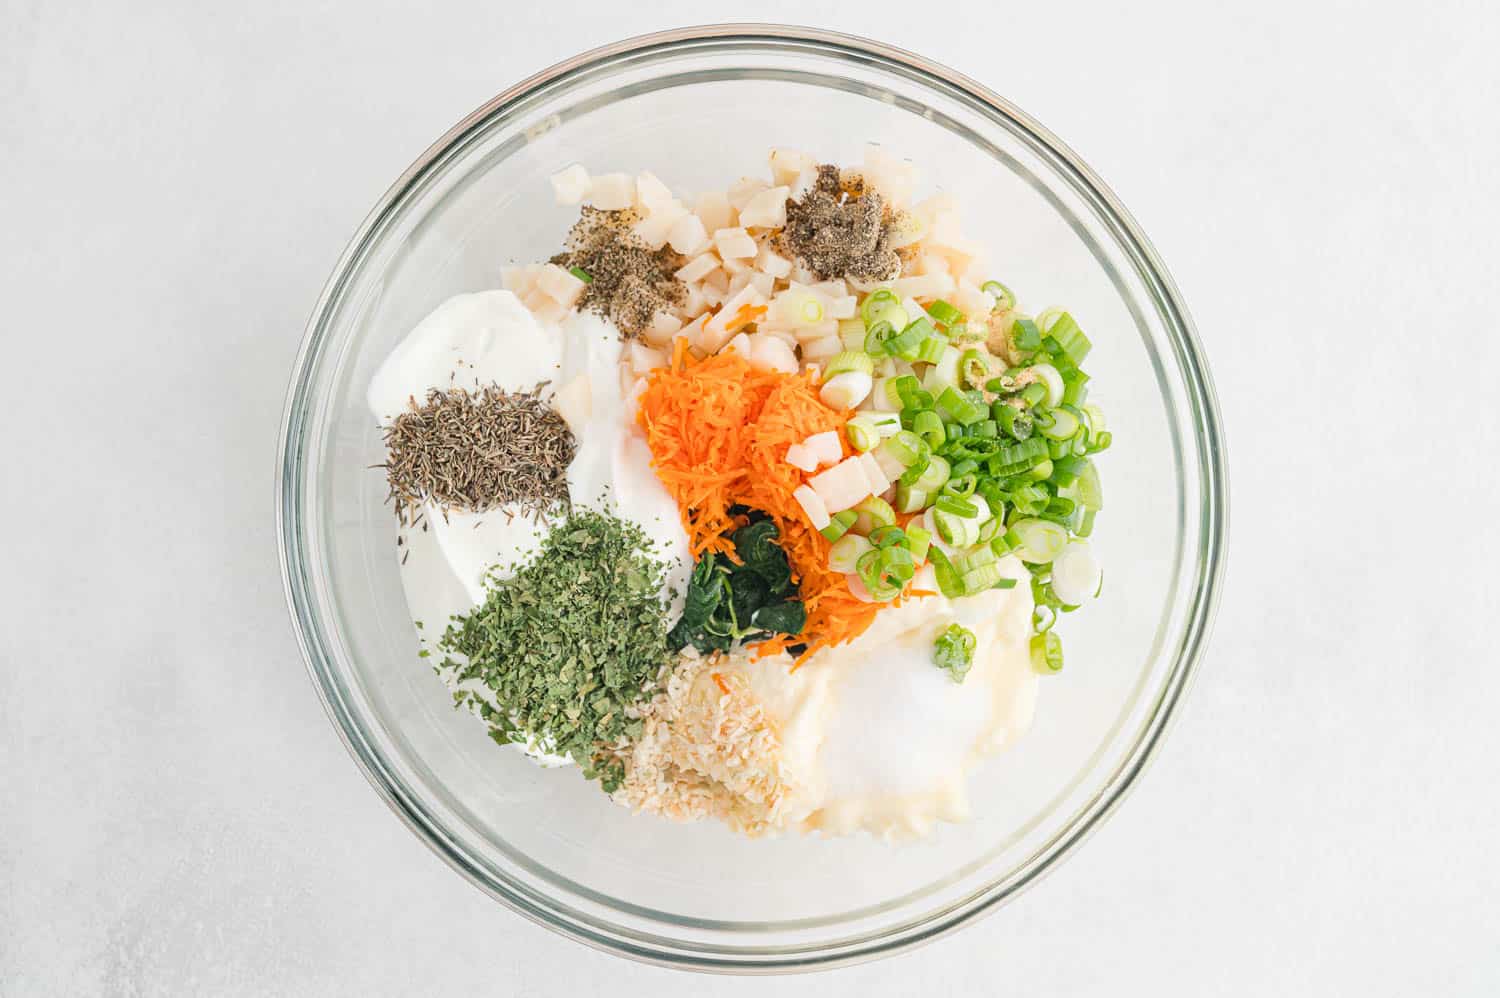 Ingredients, unmixed, in a clear glass bowl.